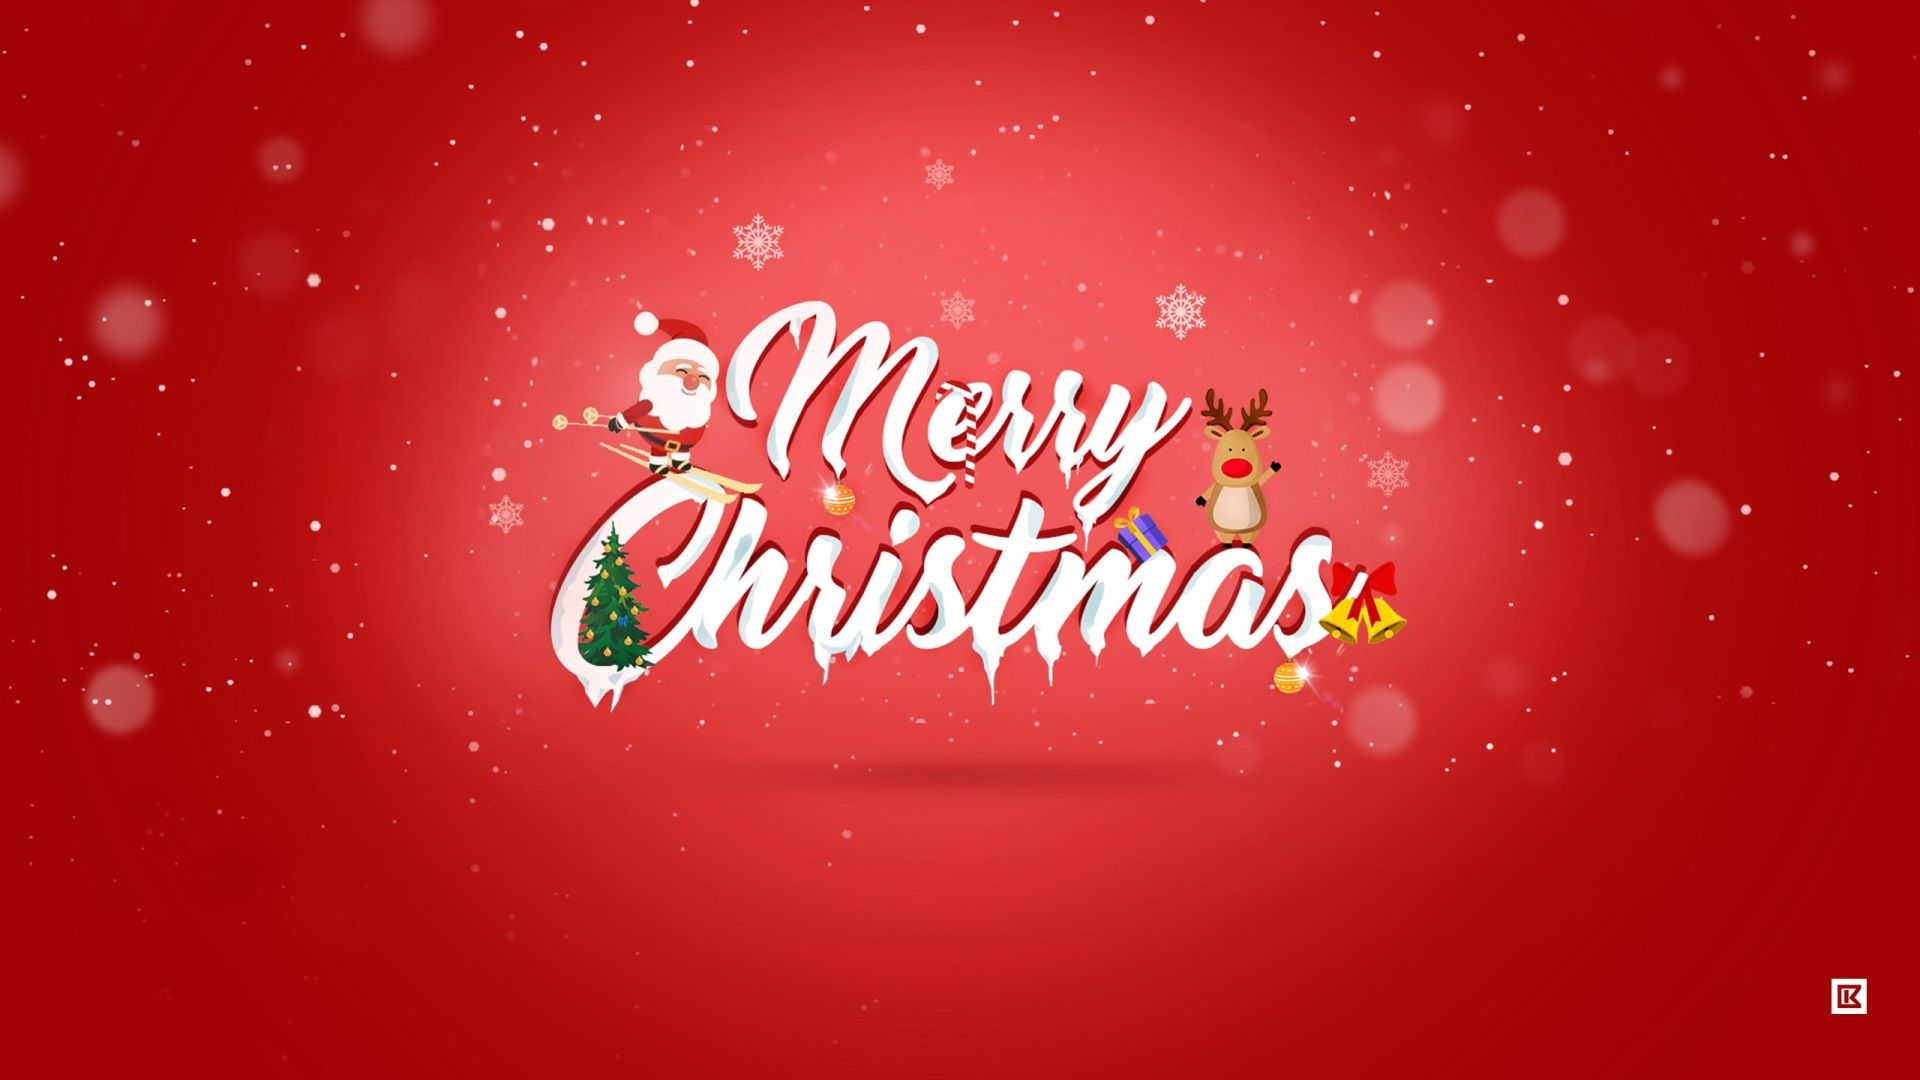 Free download Merry Christmas Wallpapercom [1920x1080] for your Desktop, Mobile & Tablet. Explore Free Merry Christmas Wallpaper Image. Free Merry Christmas Wallpaper Image, Merry Christmas Wallpaper Image, Image